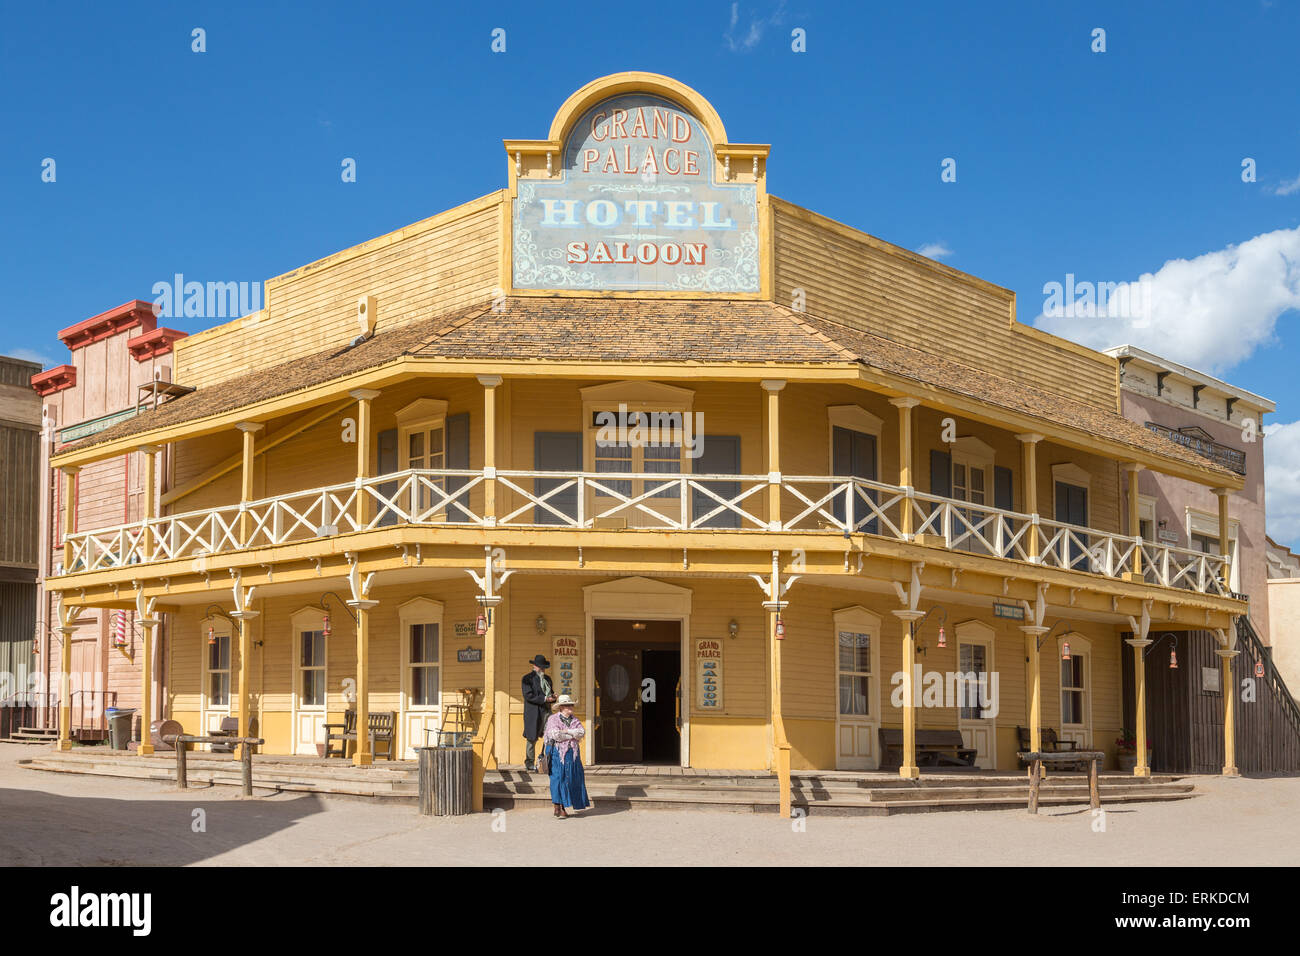 Wild West scenery, big hotel, historically dressed passers-by at the front, Old Tucson Studios, Tucson, Arizona, USA Stock Photo